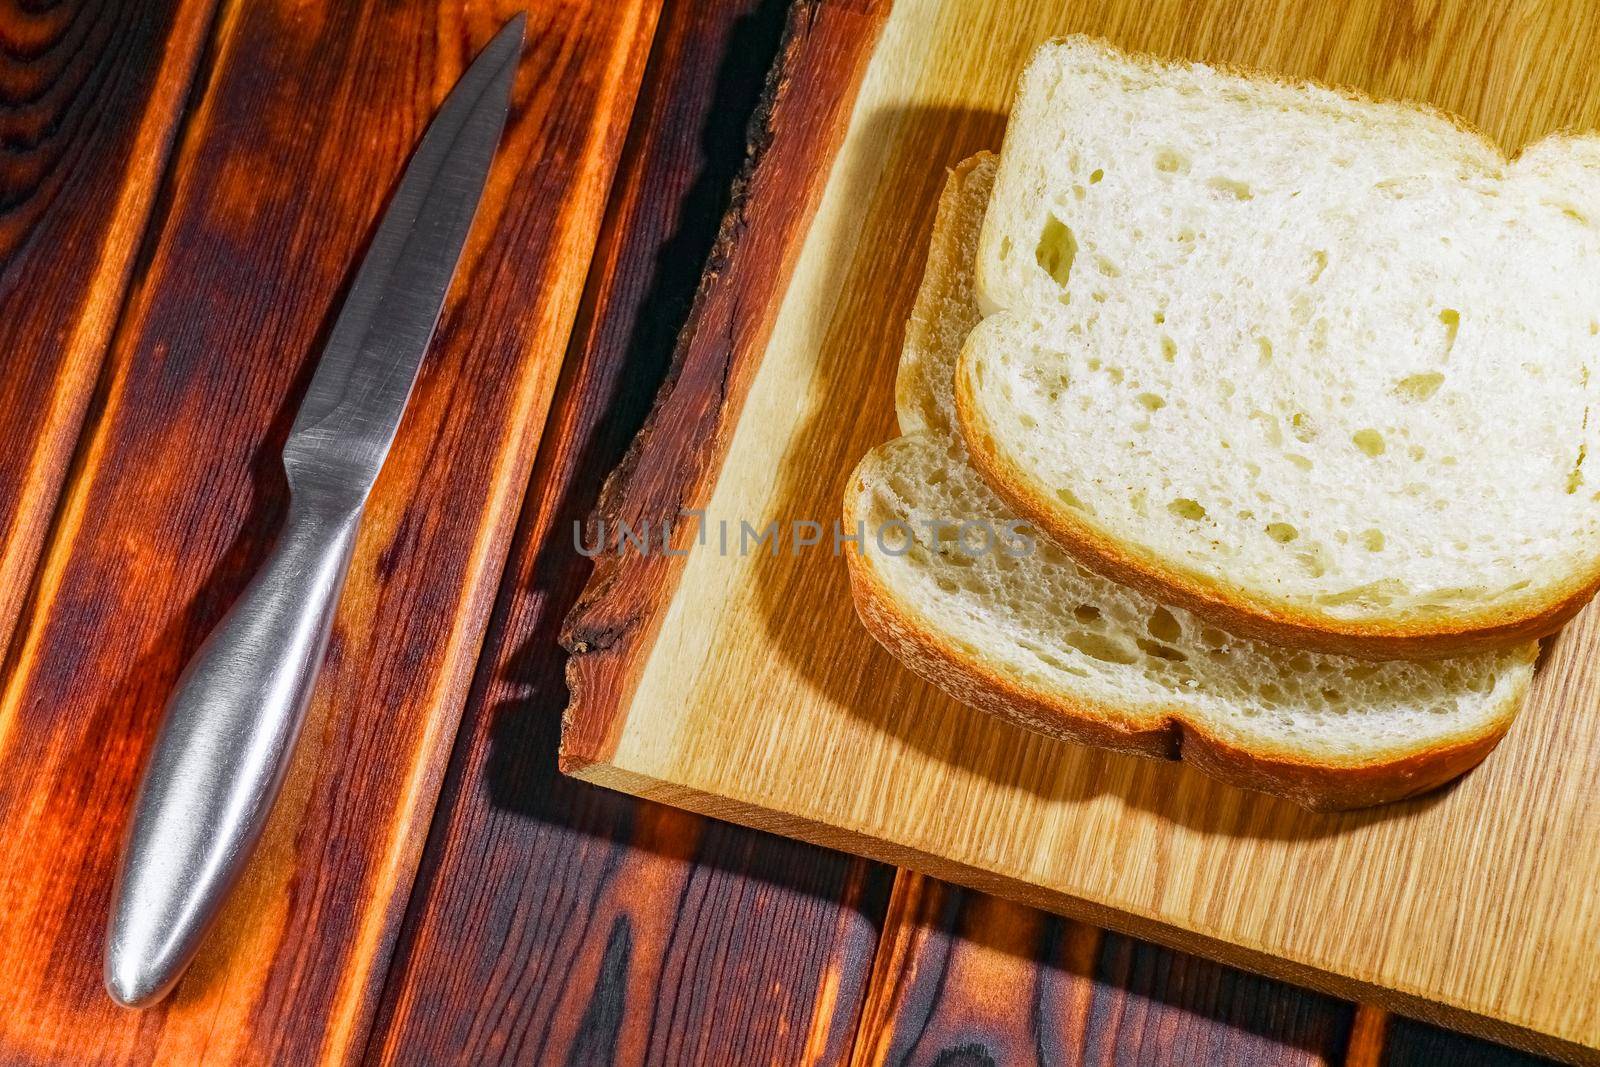 sandwich on the cutting Board as background by roman112007